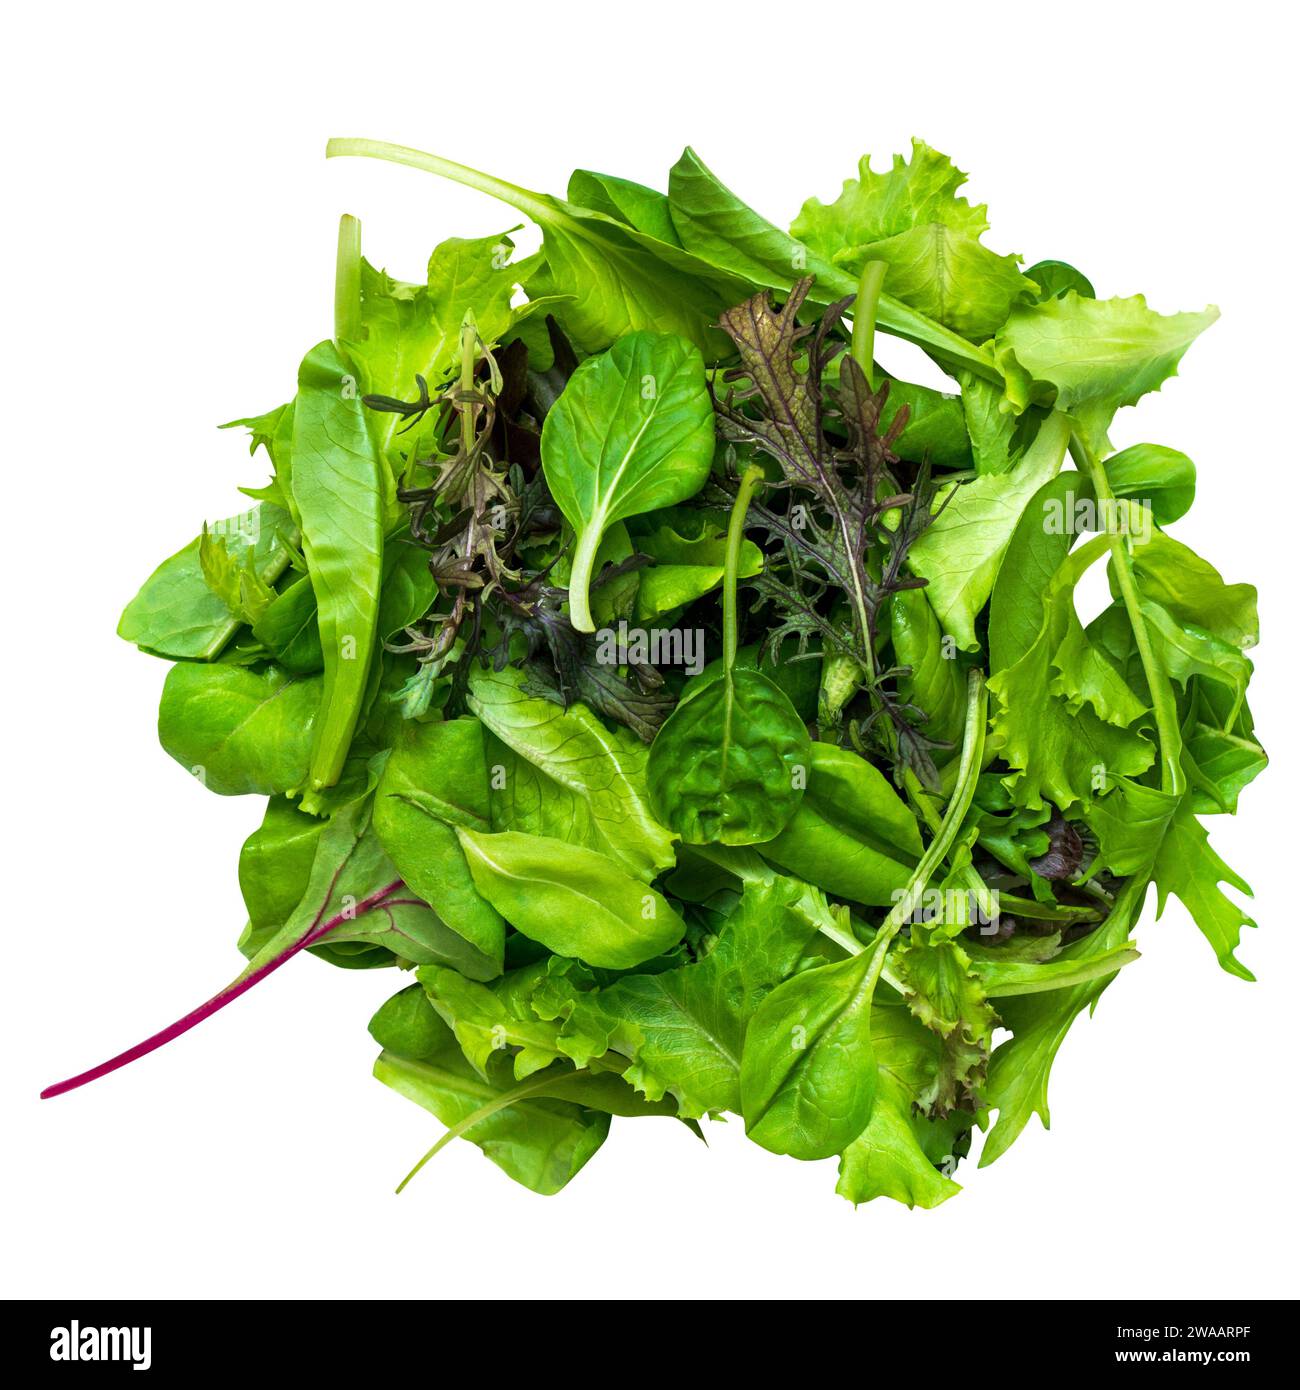 Salad mix with rucola, lettuce, shpinach isolated on white background. Stock Photo